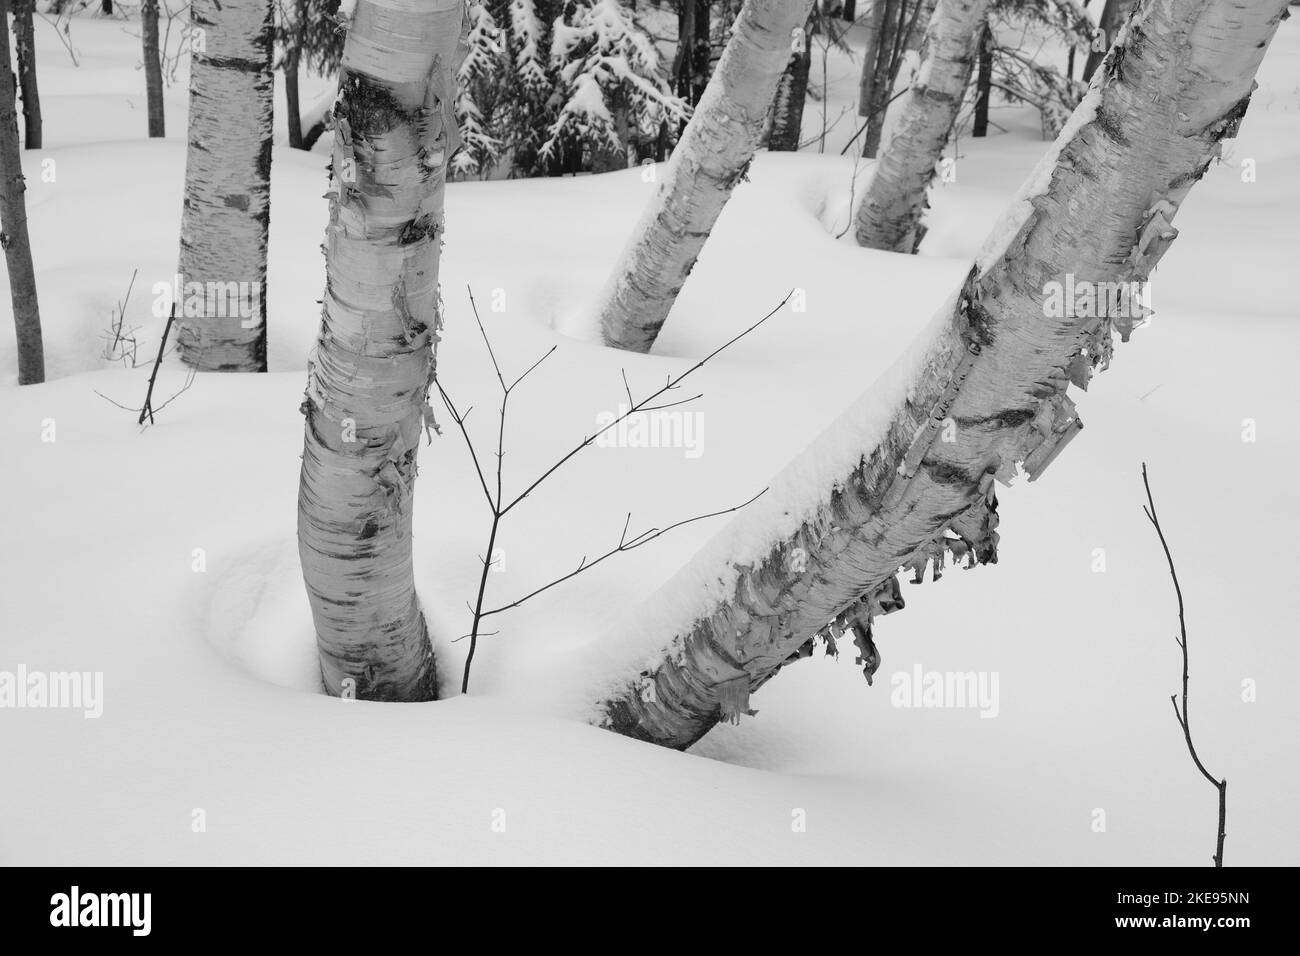 Beautiful, graceful birch trees in new snow, Trapp Family Lodge, Stowe, Vermont, USA. Stock Photo